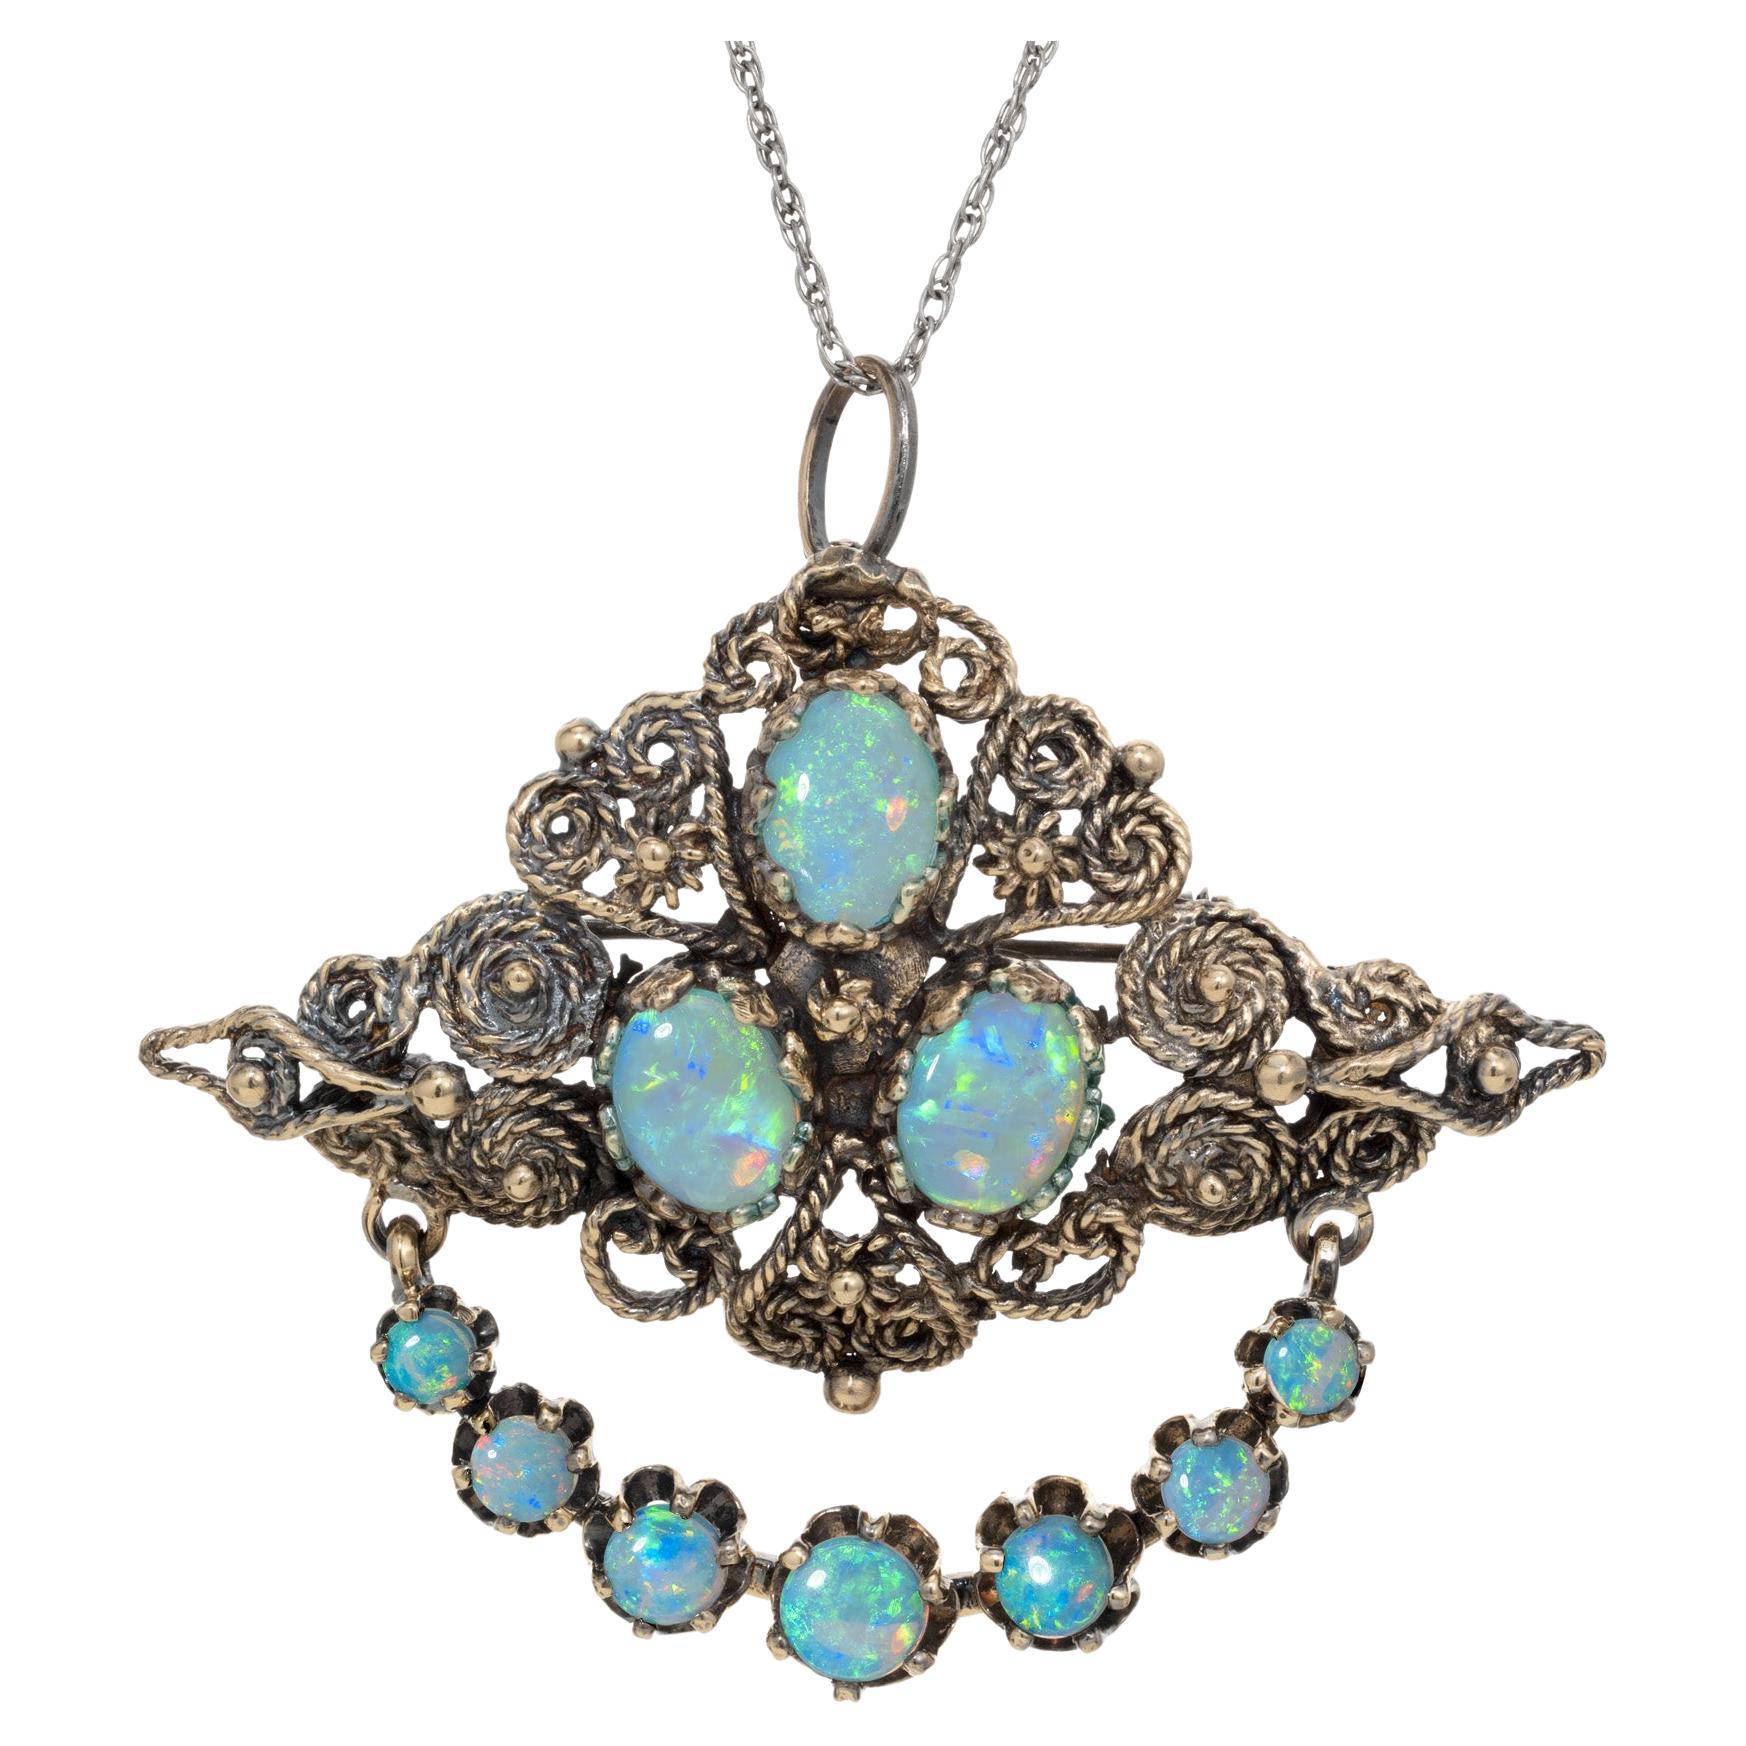 Exceptional Karbra fine opal brooch pendant necklace. Antique revival style made in the 1960's by Karbra. 3 oval opals are mounted in the center of the 14k yellow gold pendant accented with a dangle bar of 7 graduated round opals. This unique highly